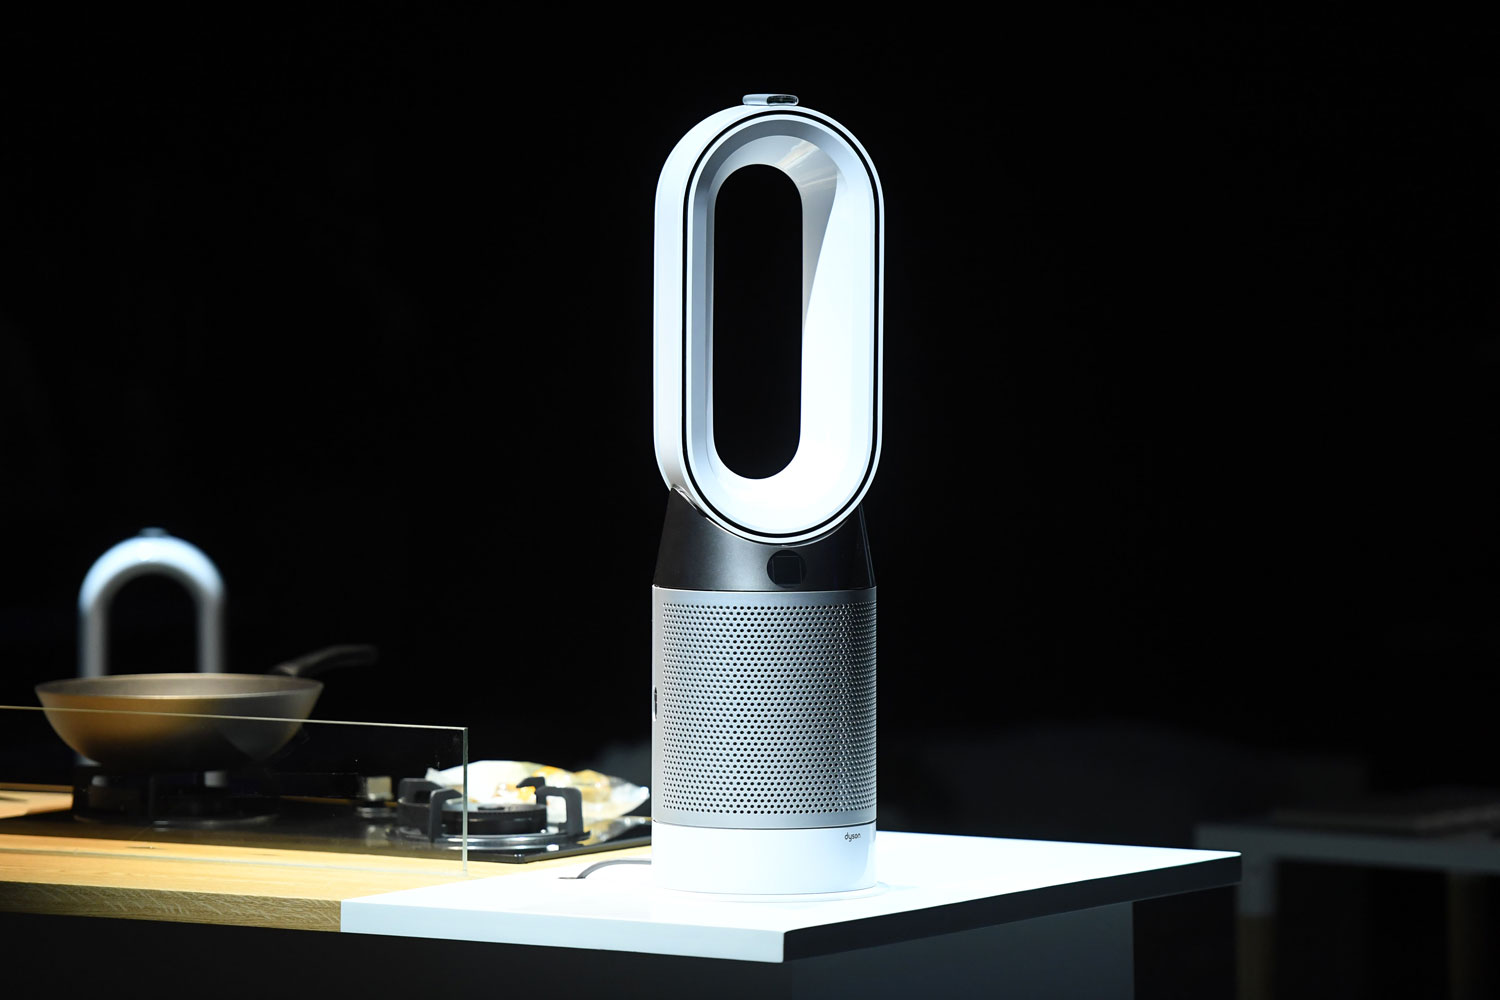 A small Dyson air purifier on the kitchen table